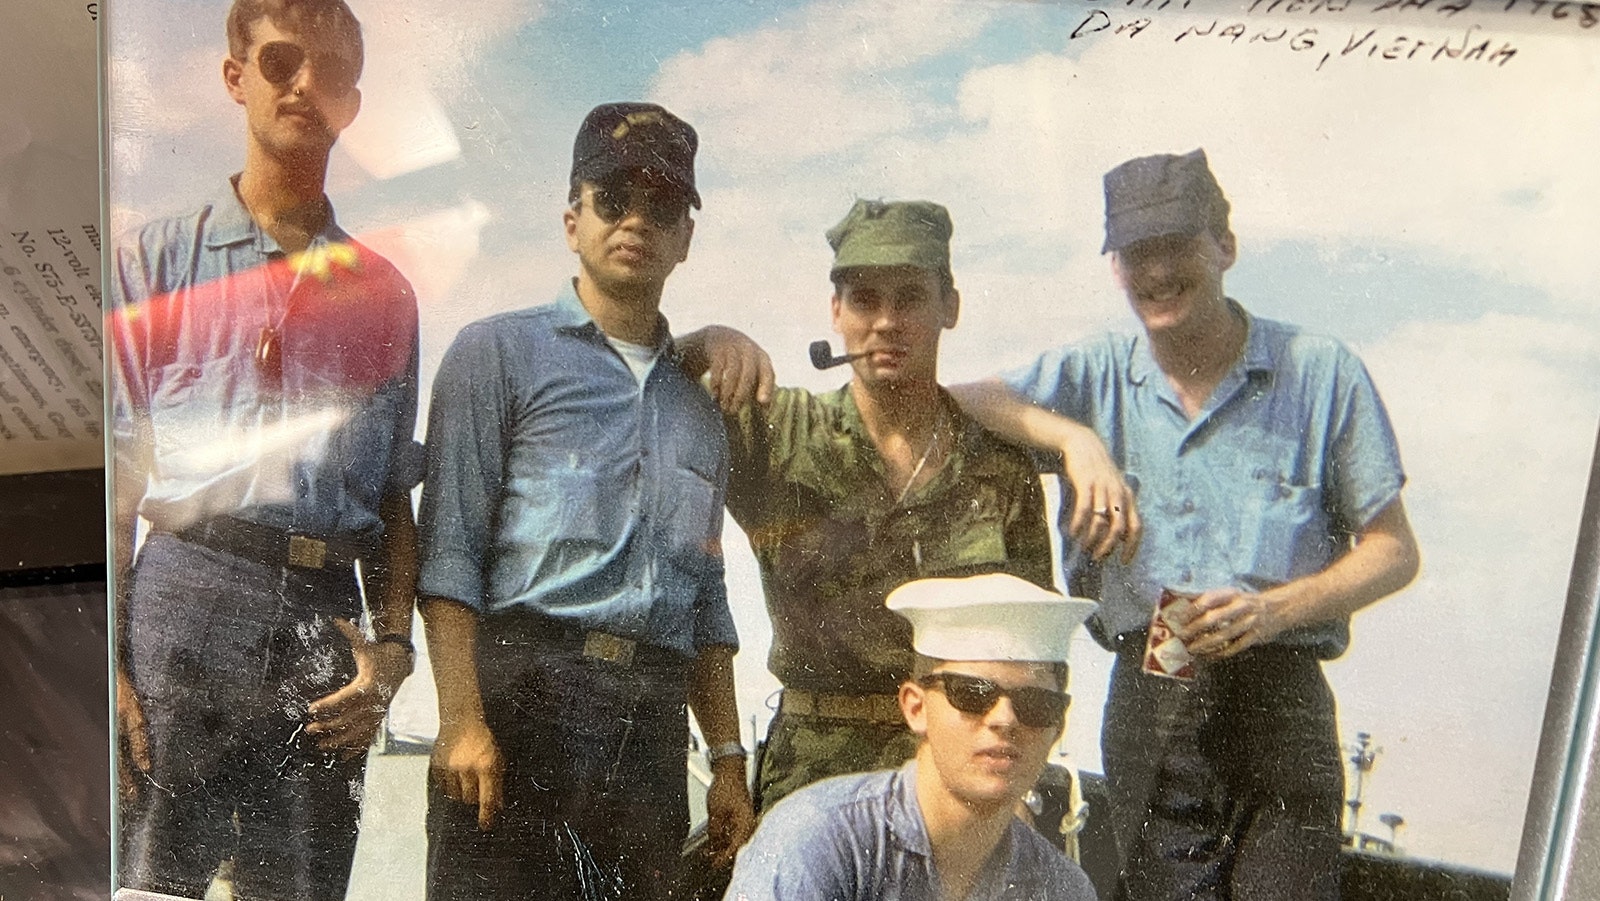 Vietnam veteran Gene Dickerson, in camouflage with pipe, poses with buddies in Da Nang, Vietnam in a photo displayed in his museum.